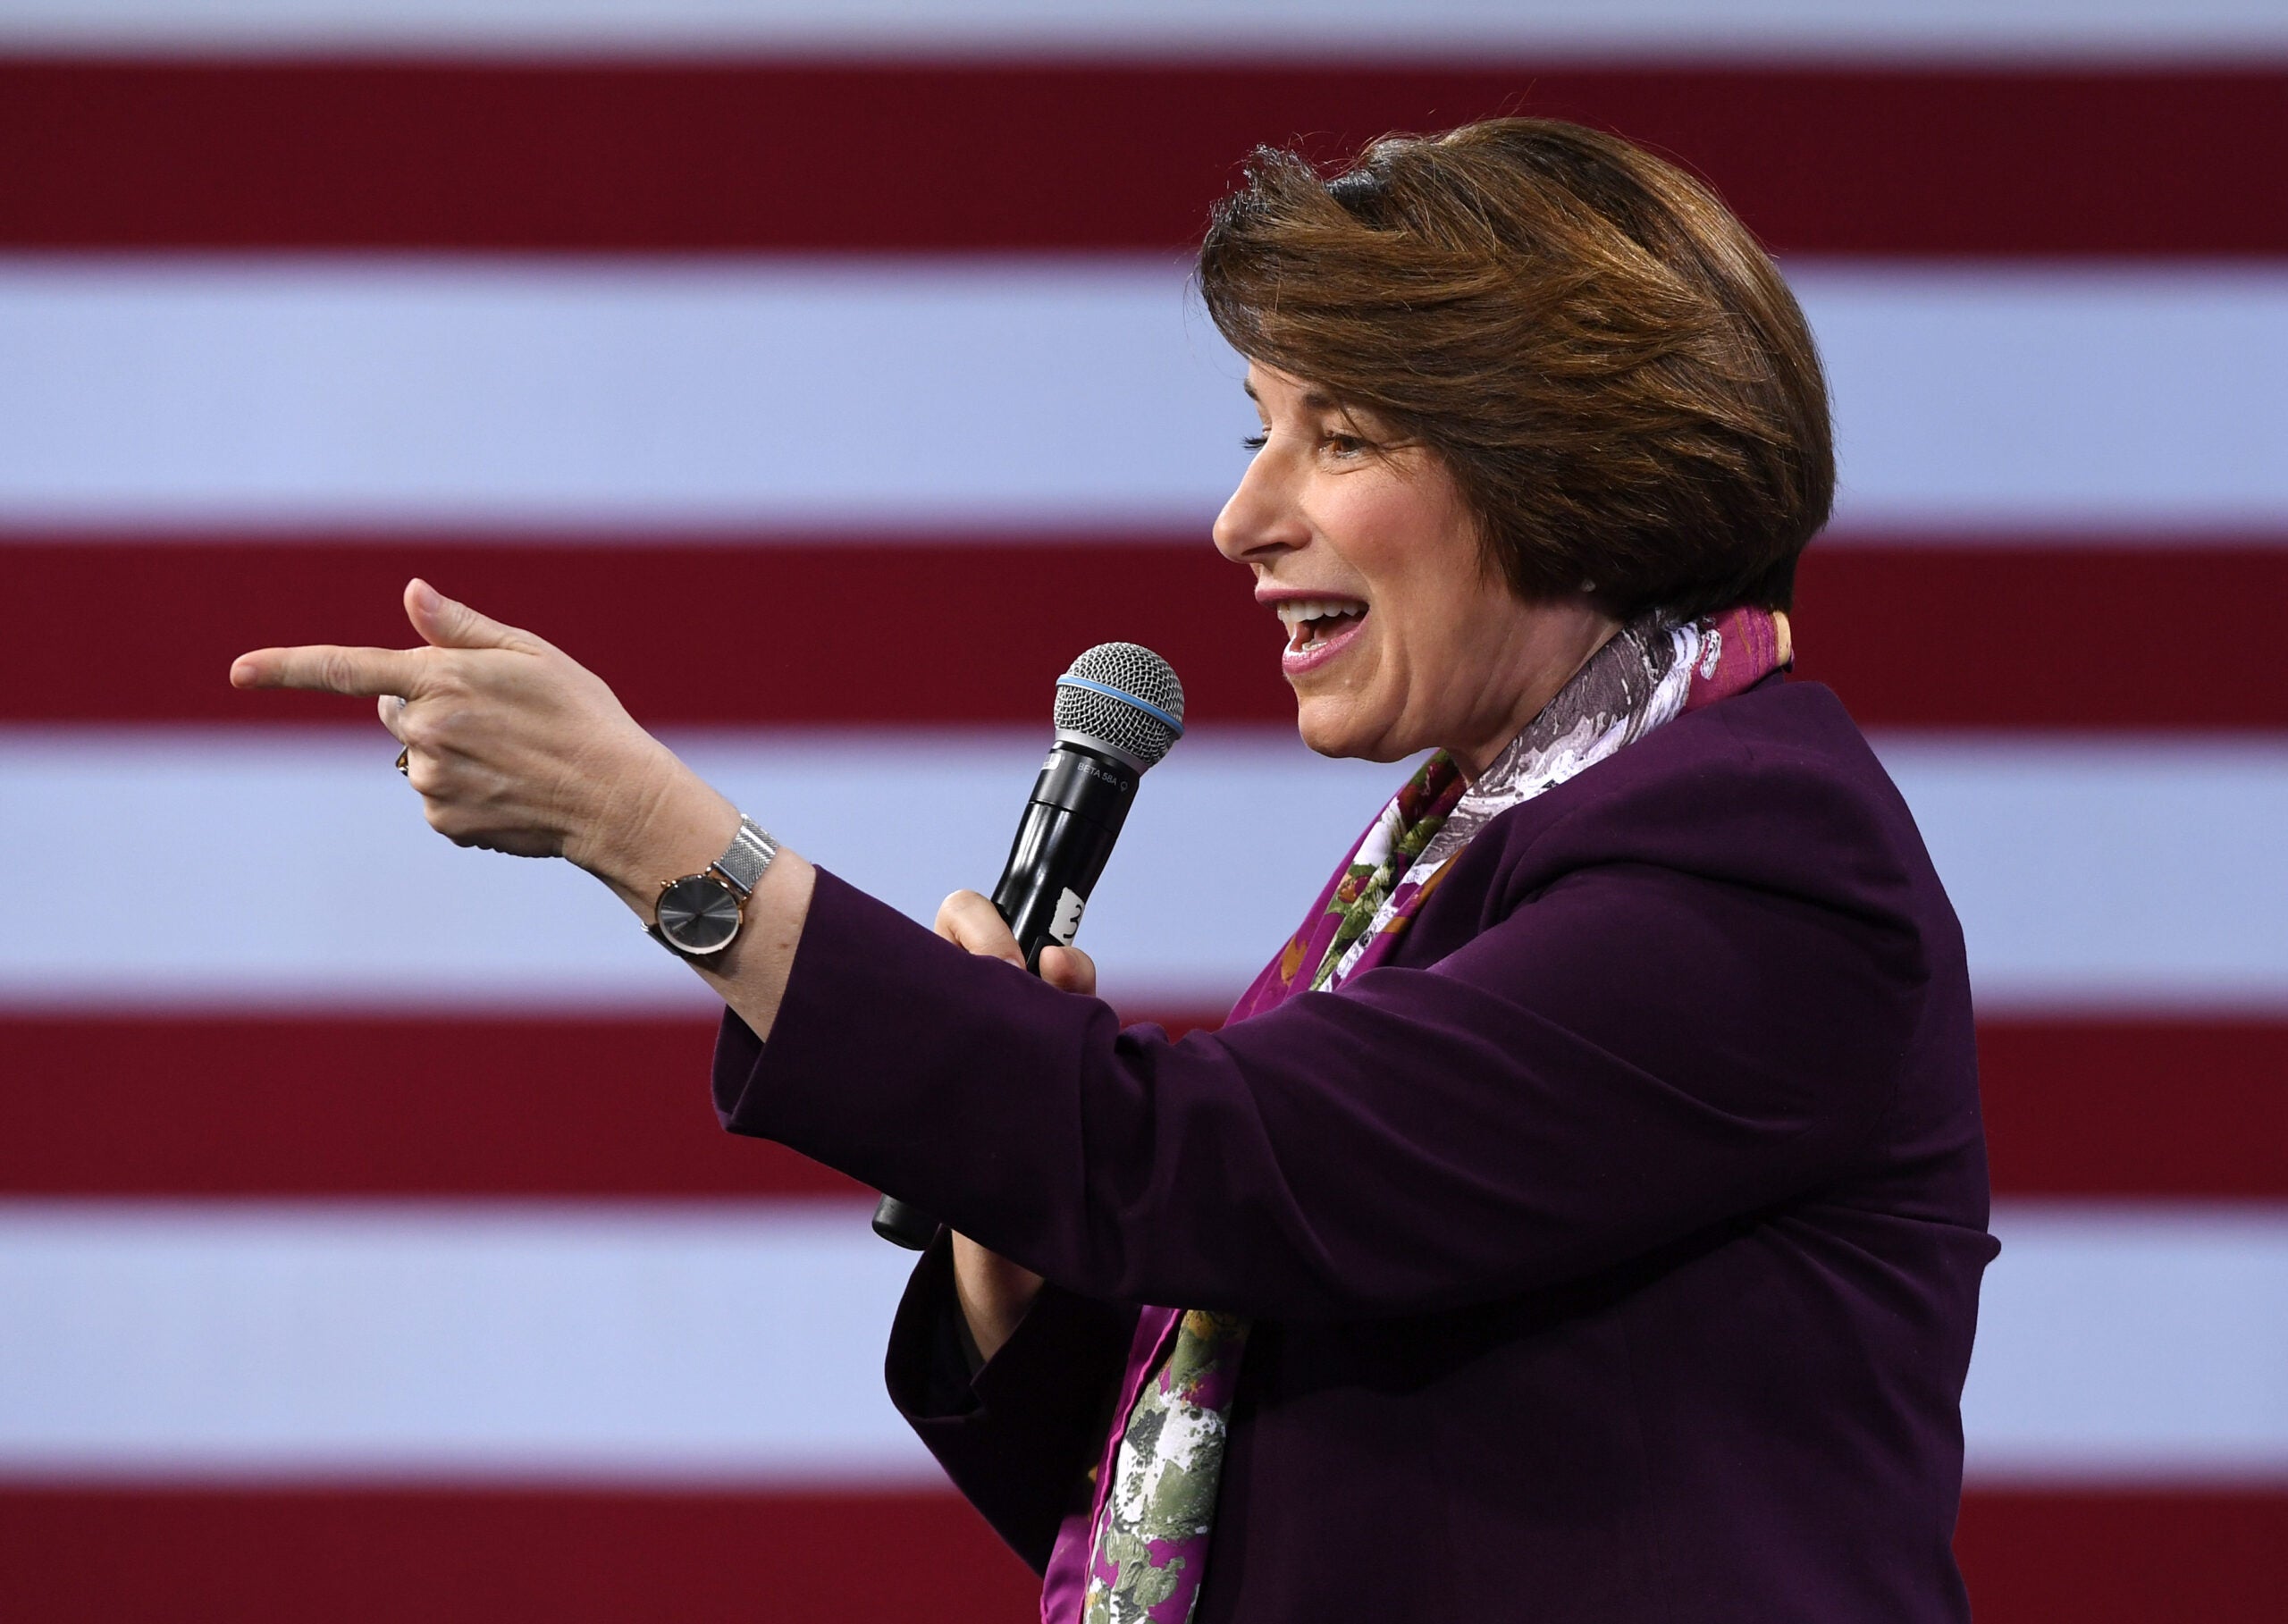 Amy Klobuchar interview: “Debates will begin at the end of June. We will get the field narrowed.”